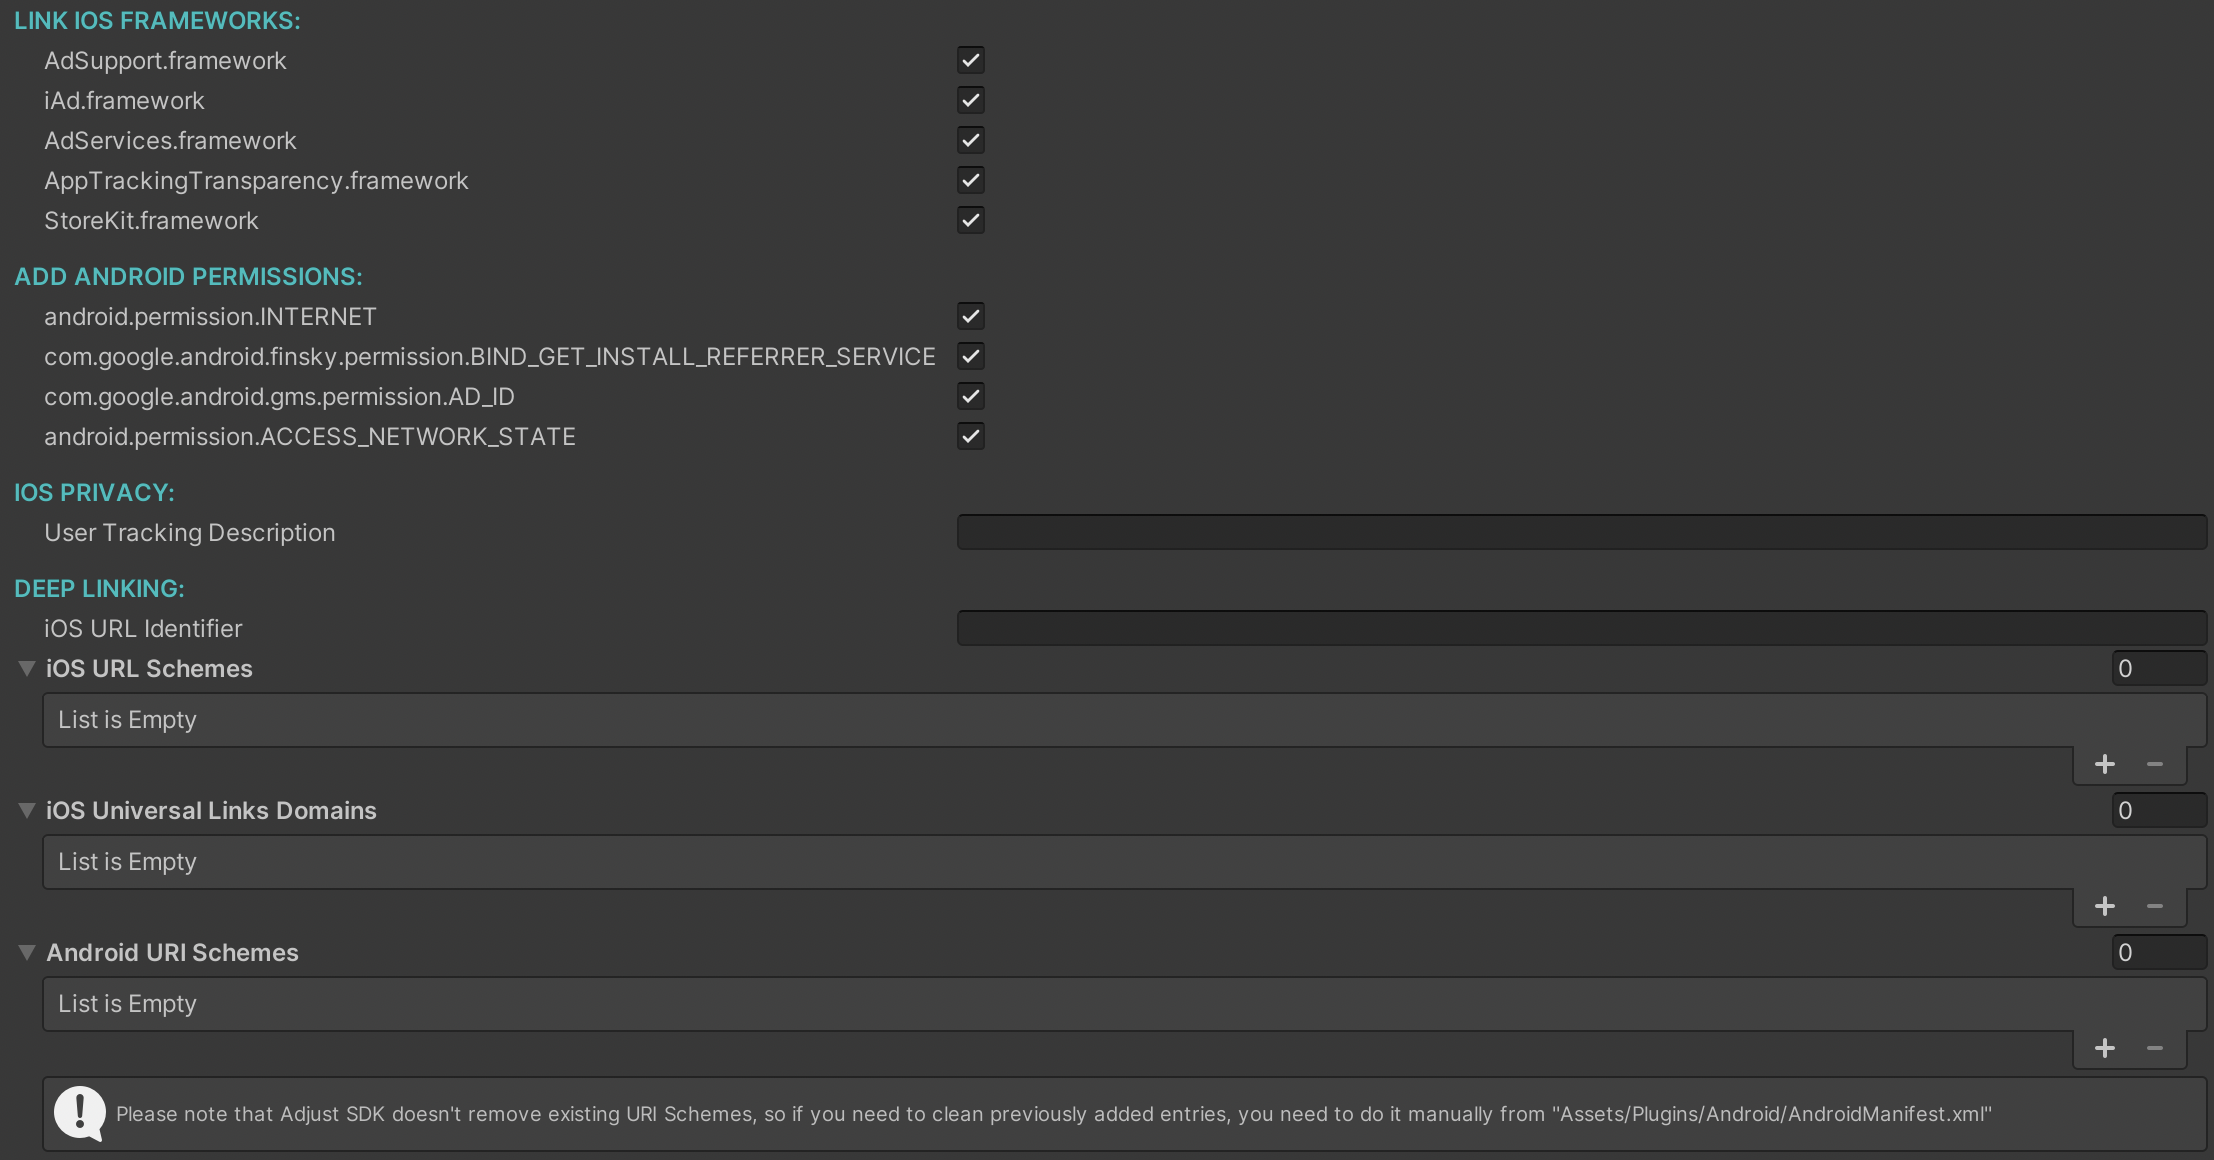 A screenshot of the Adjust SDK post-build configuration script in the Unity editor.